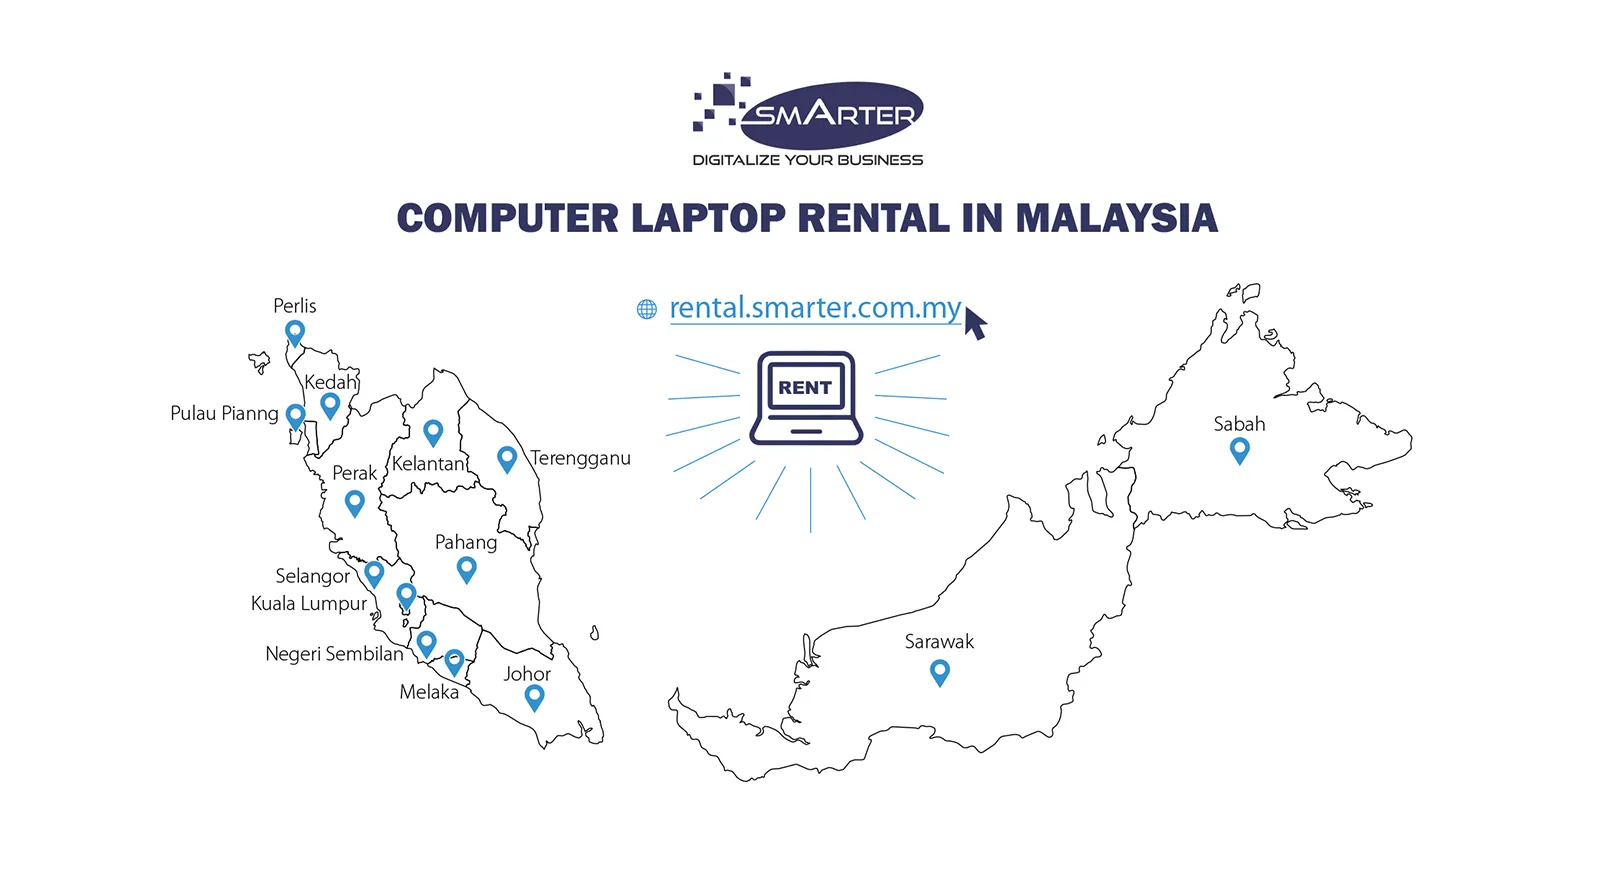 Smarter Computer Laptop Rental in Malaysia